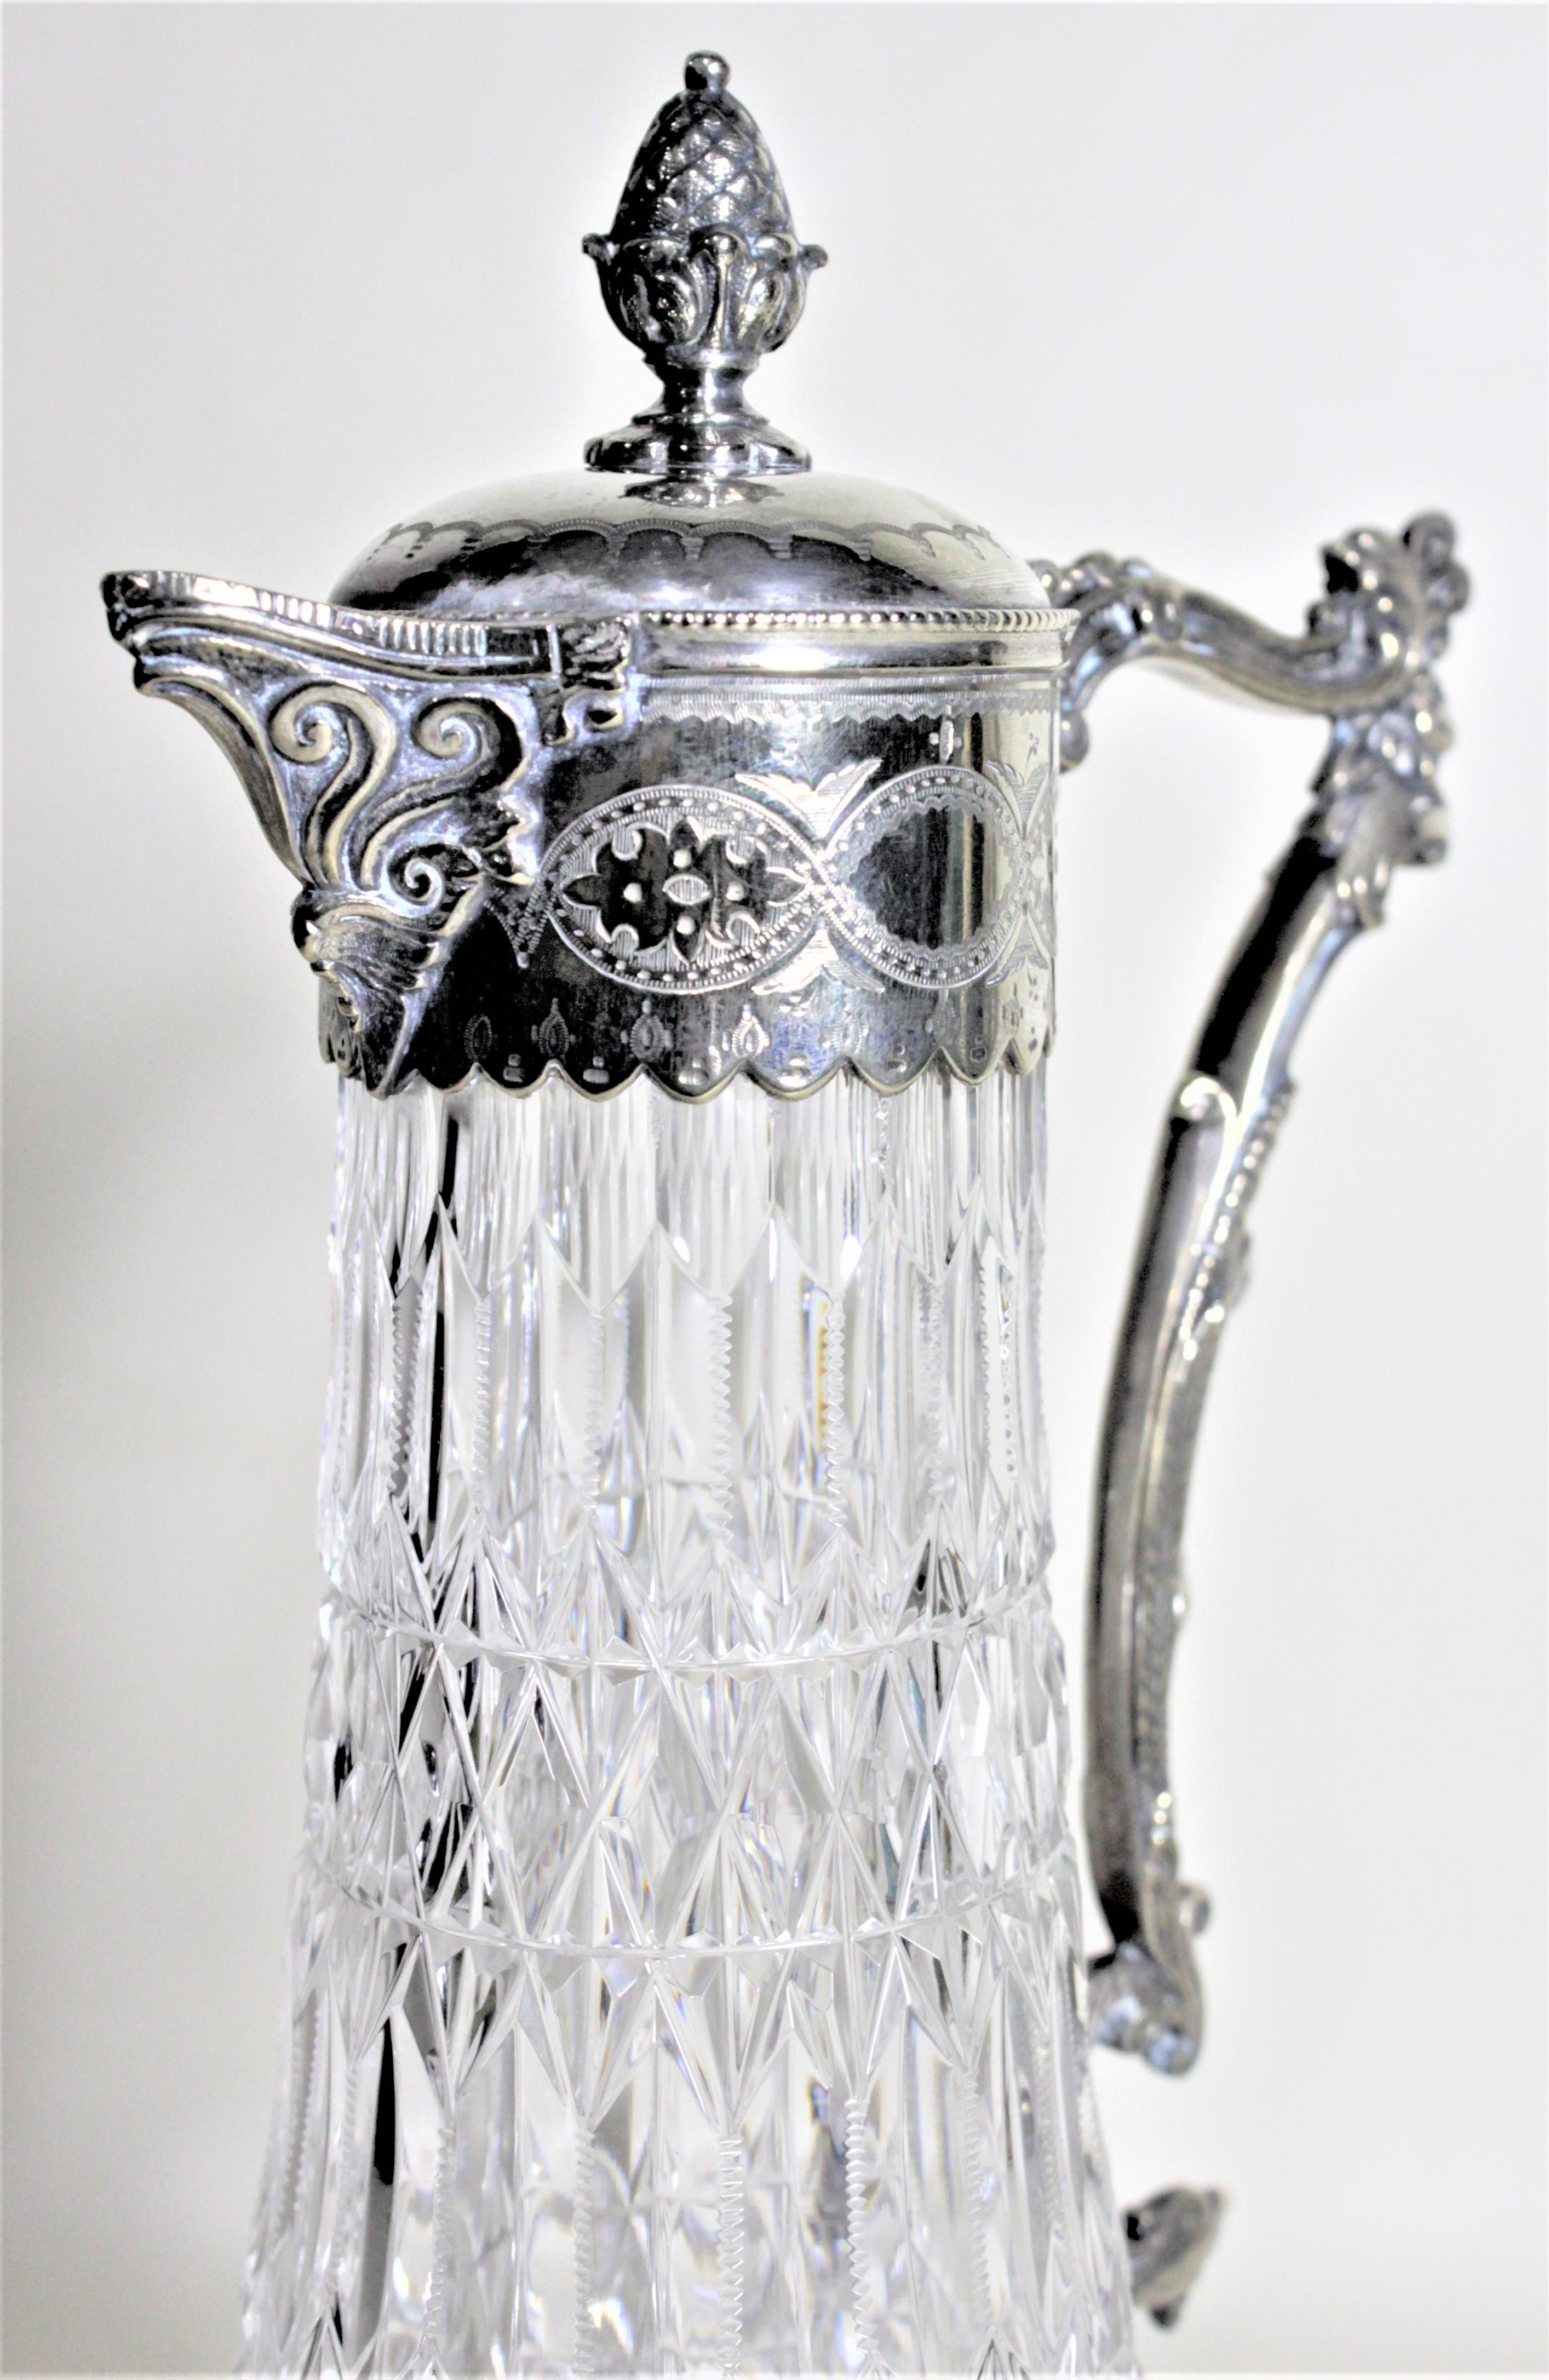 Hand-Crafted Antique English Silver Plated & Cut Crystal Claret Jug or Decanter